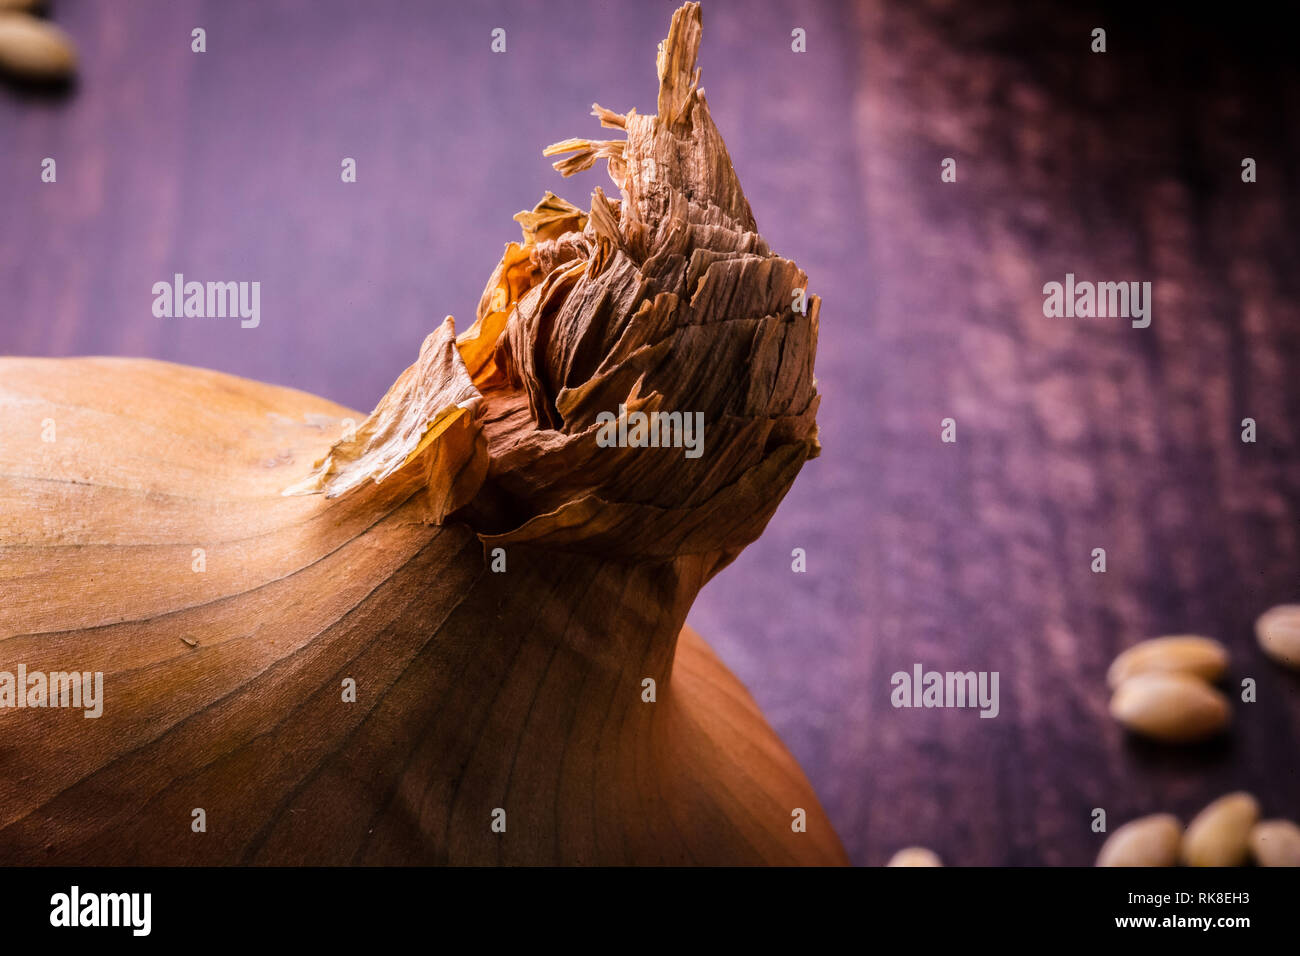 Close up of a brown onion with the tunic clearly visible Stock Photo